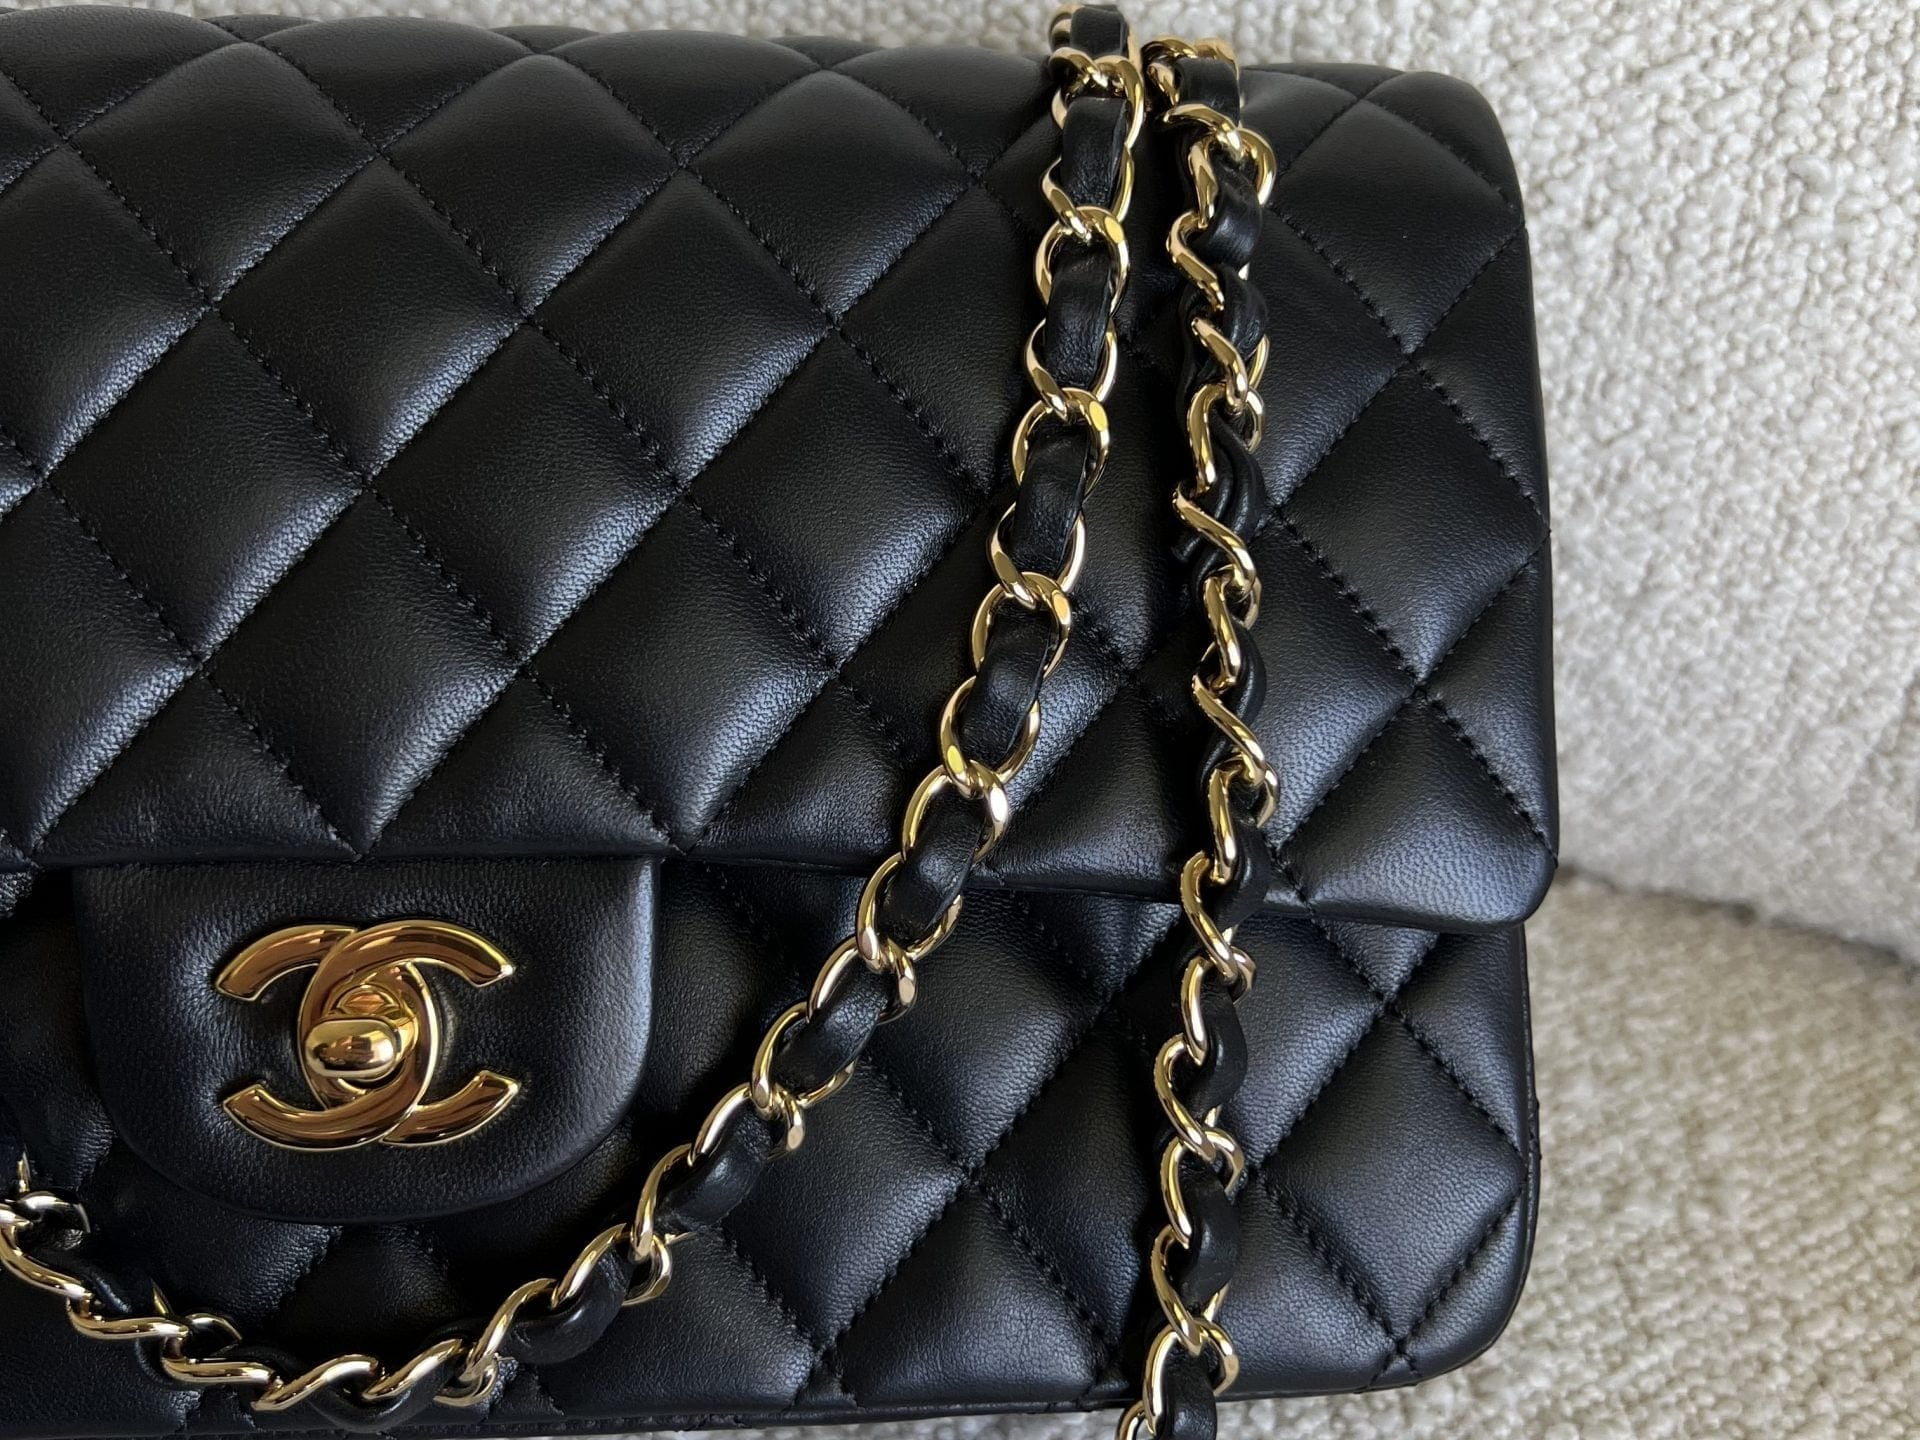 CHANEL Handbag Chanel Black Lambskin Quilted Classic Flap Medium GHW - Redeluxe